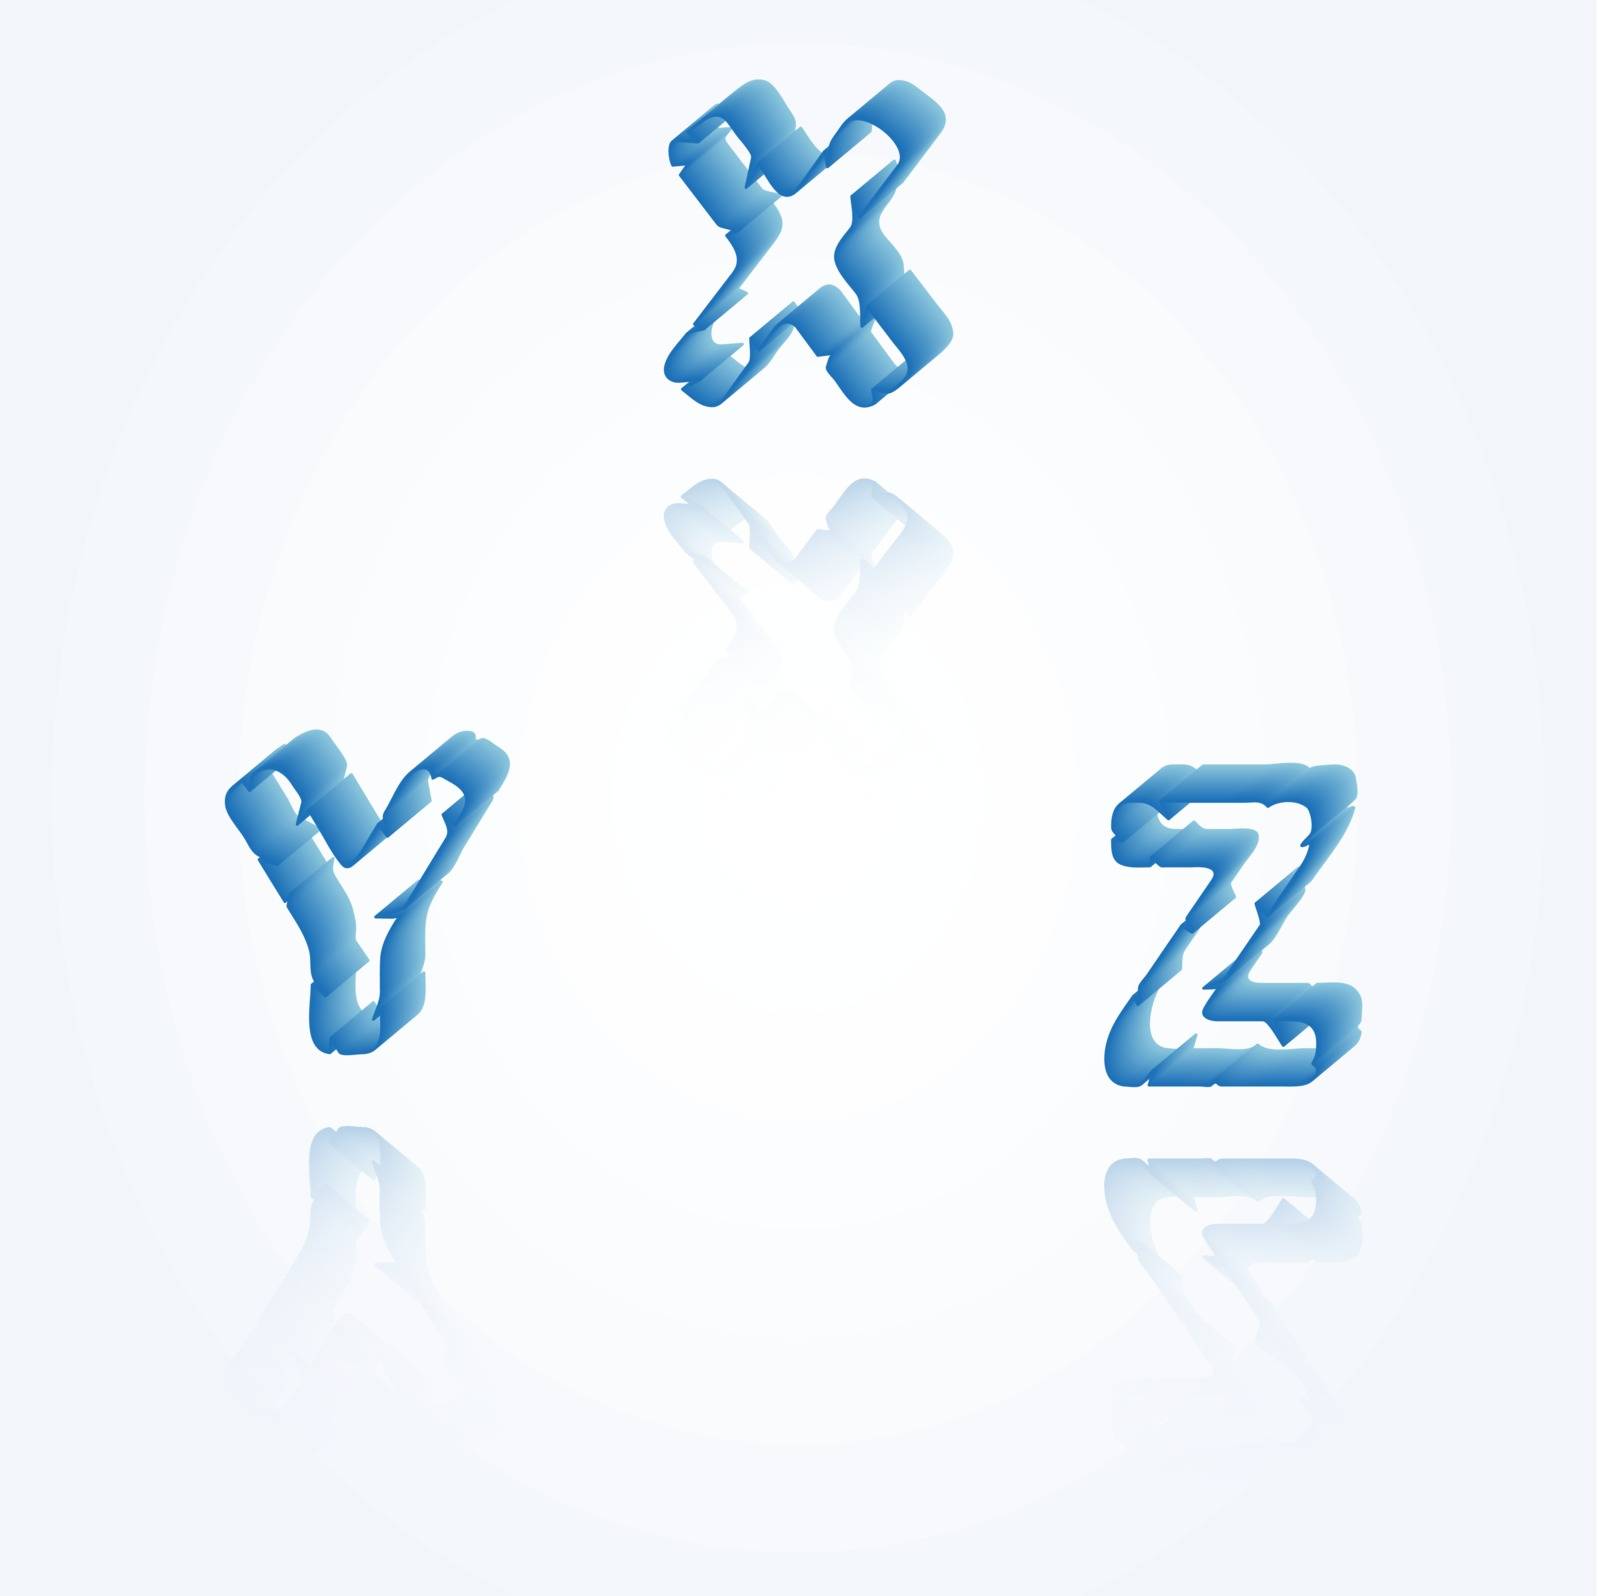 sketch jagged alphabet letters with 3d effect and shadow on white background, X, Y, Z